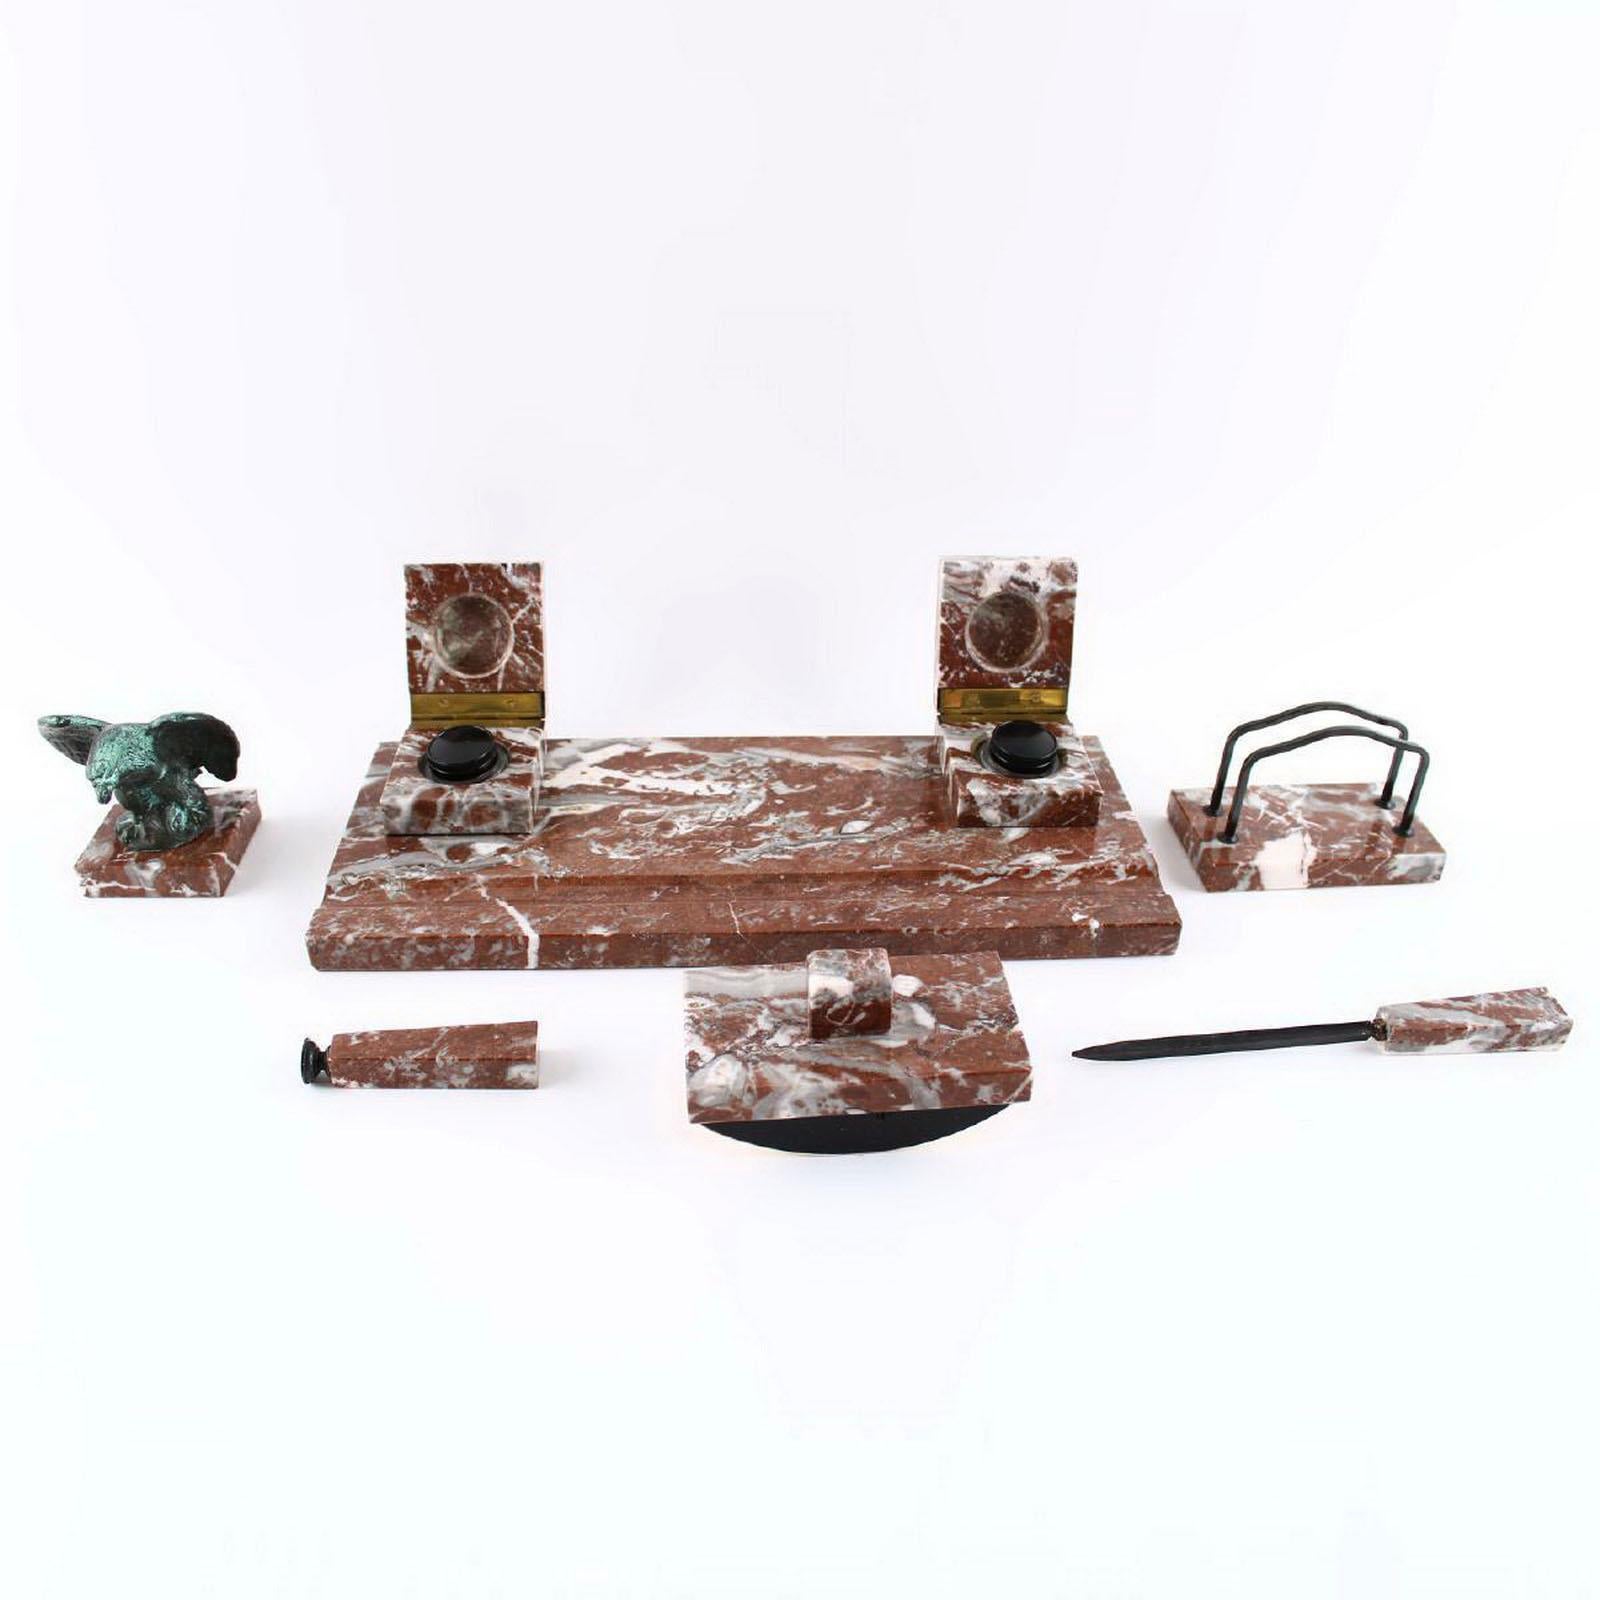 An outstanding desk set made of beautiful Italian Levanto red marble.
Comprising:
- Pen tray with two inkwell
- Letter holder
- Blotter
- Paper knife
- wax seal stamp
- Paperweight 

The glass inkwells that are original and perfect. The wax